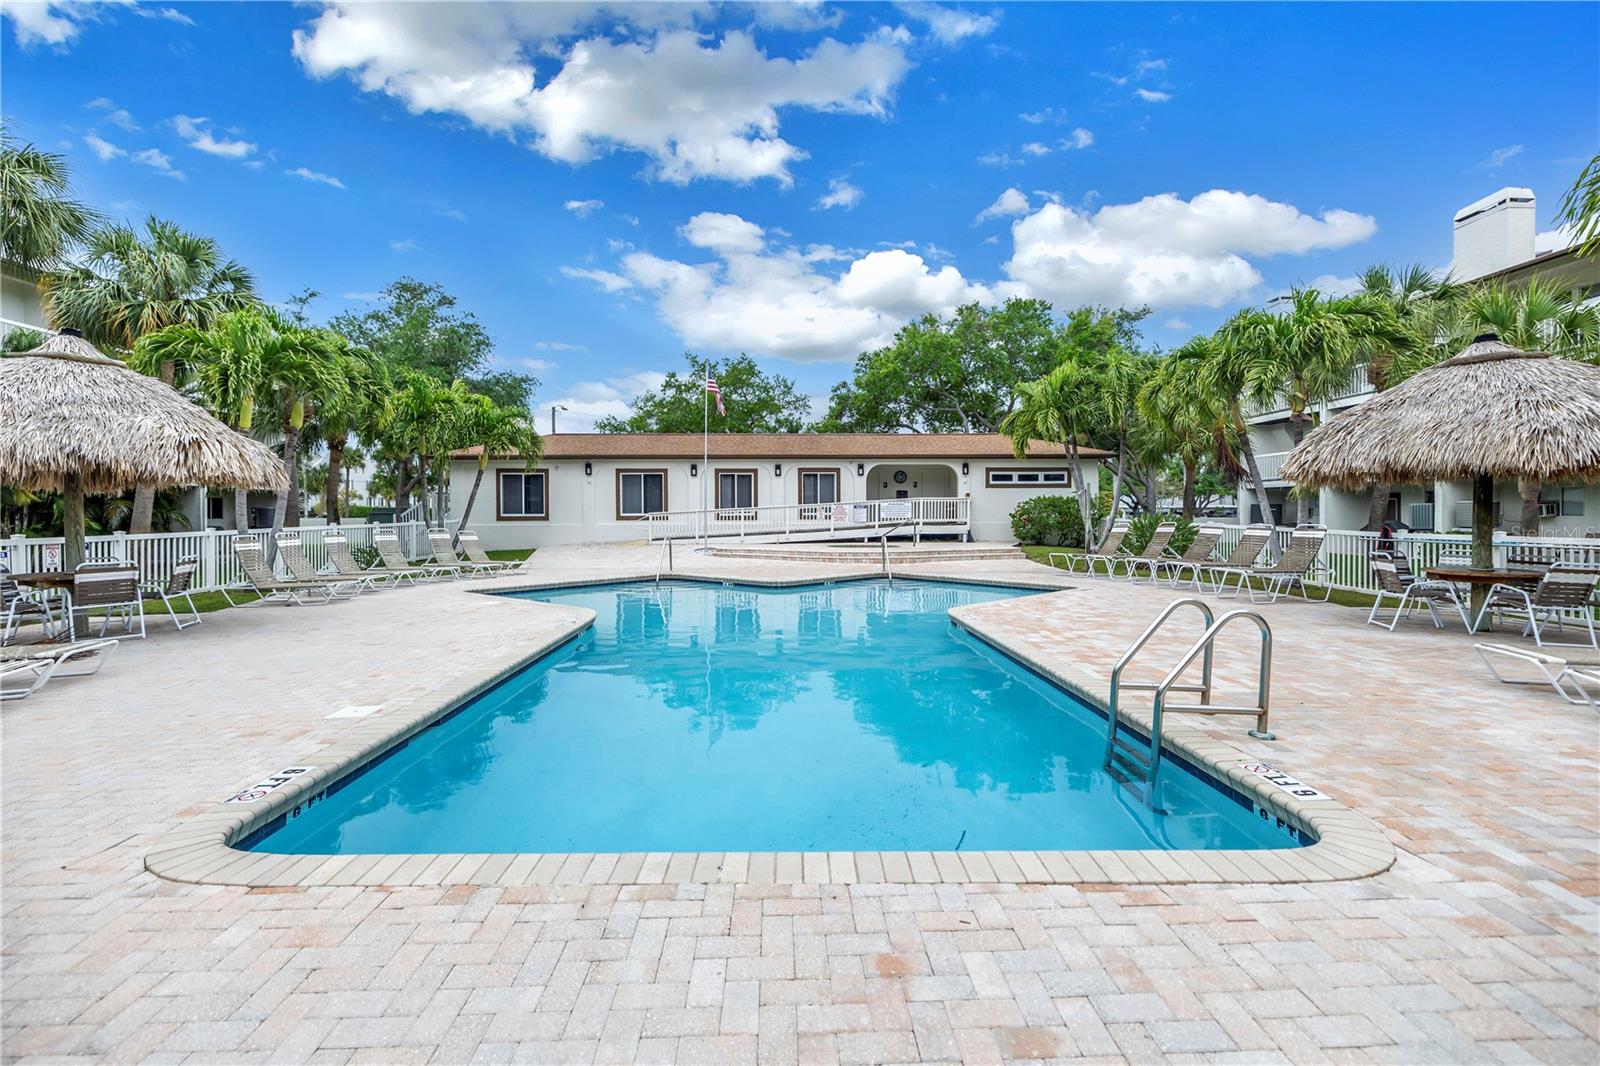 Heated pool and clubhouse/fitness center